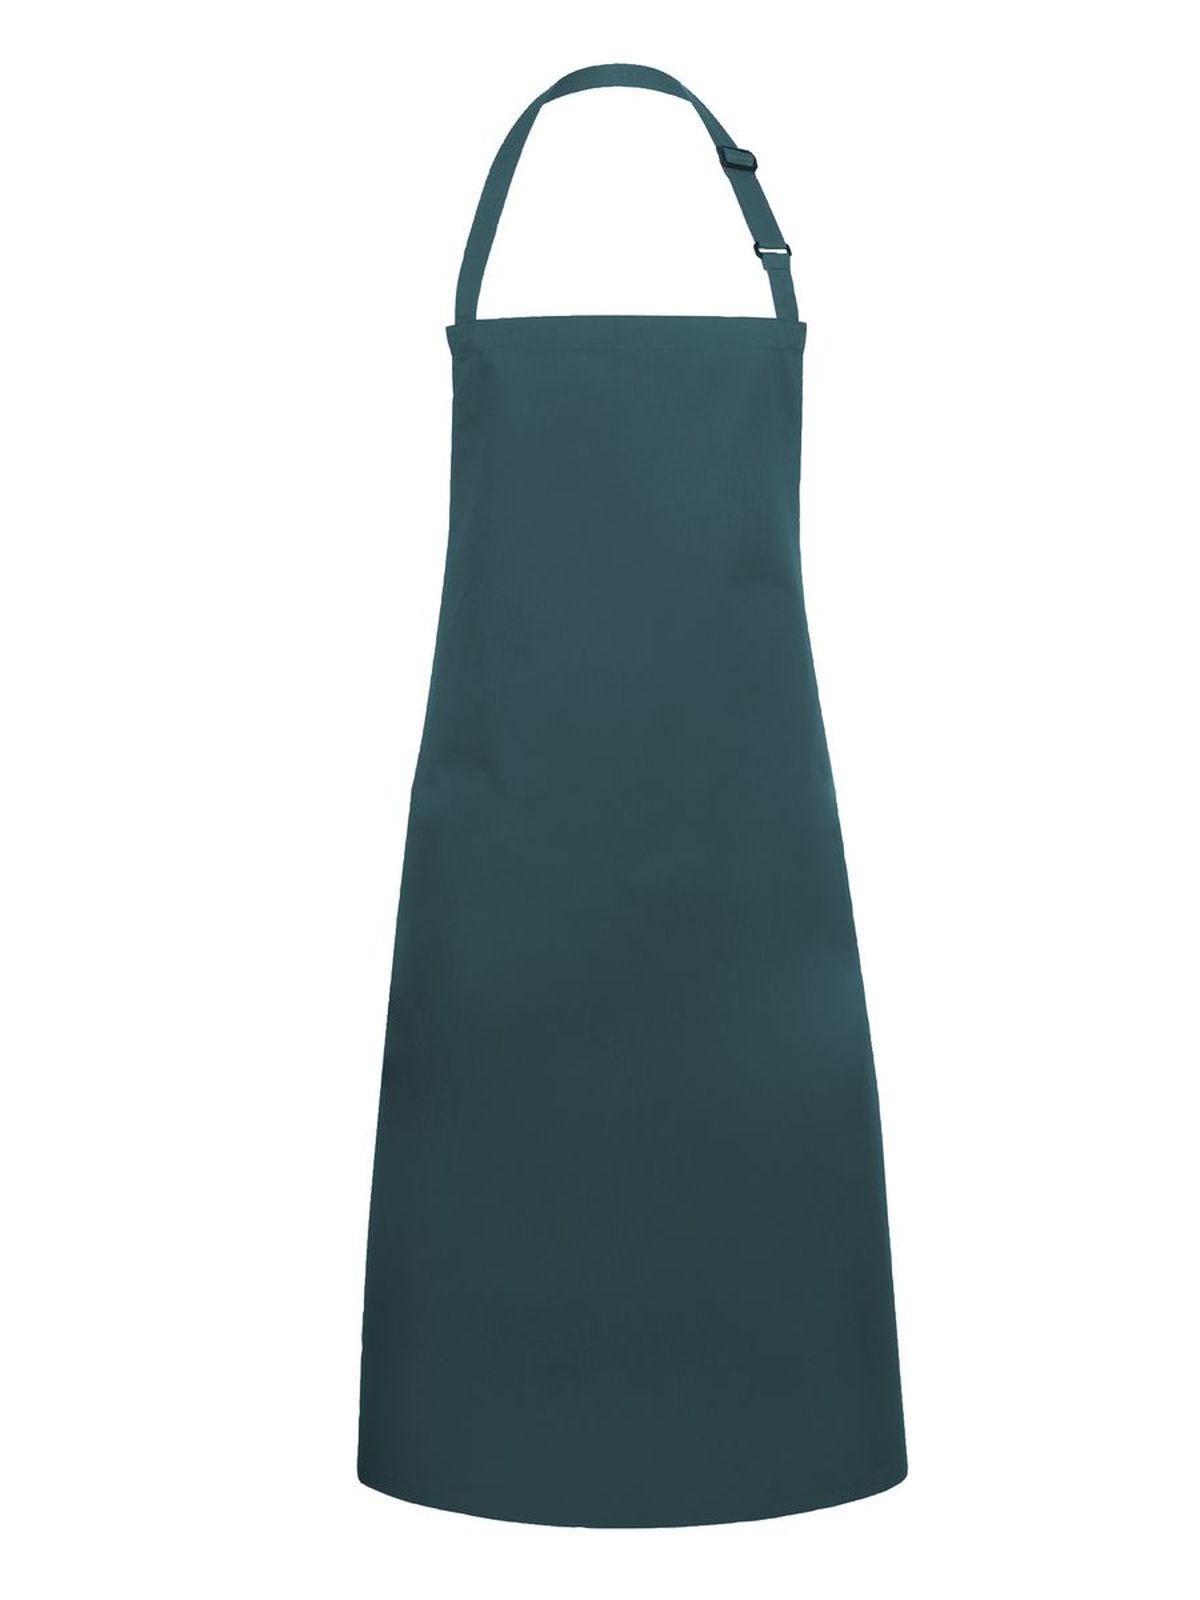 bistro-apron-basic-with-buckle-pine-green.webp